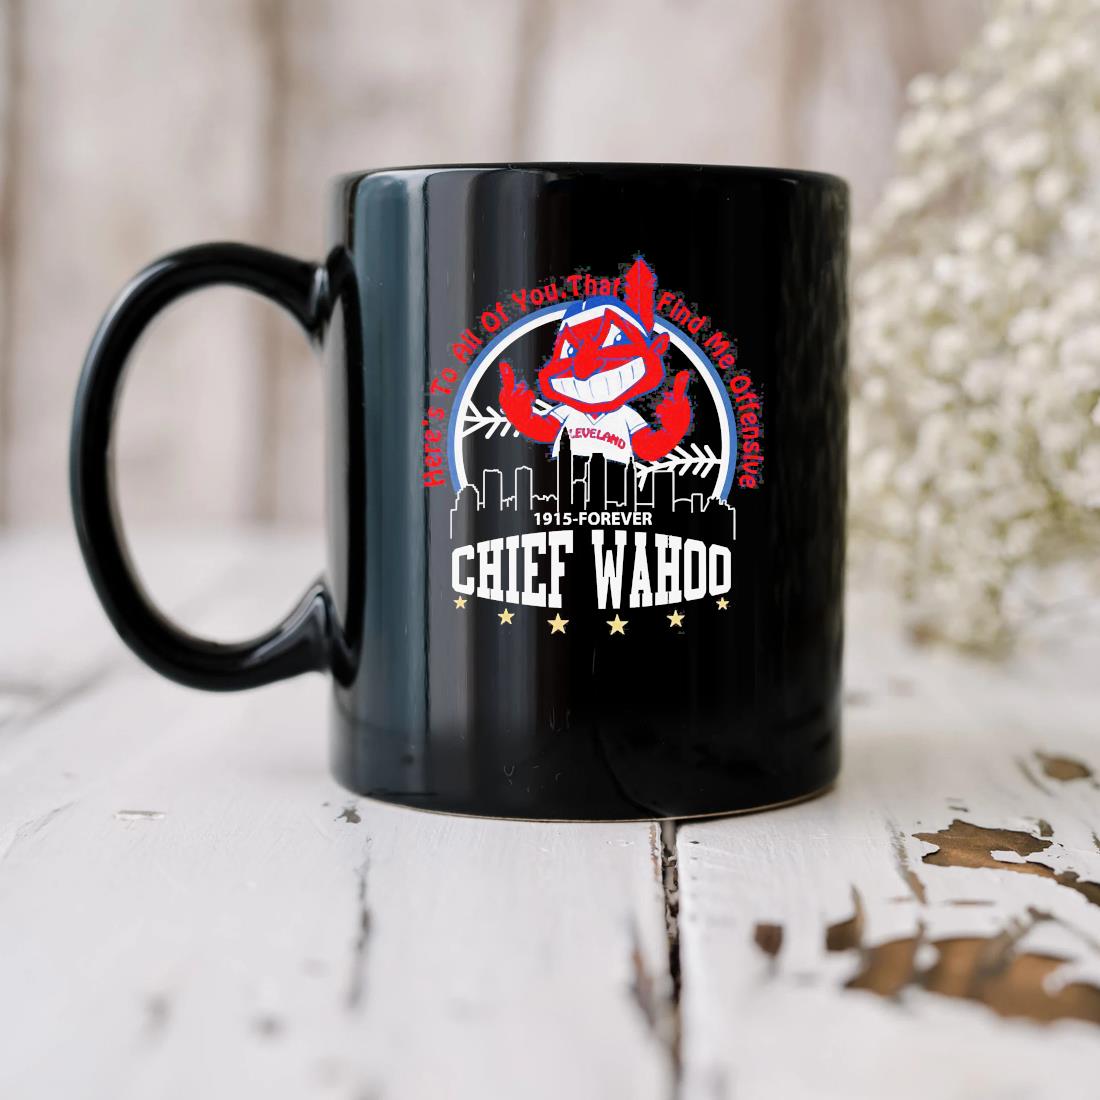 Original Here's To All Of You That Find Me Offensive 1915 Forever Chief Wahoo Mug